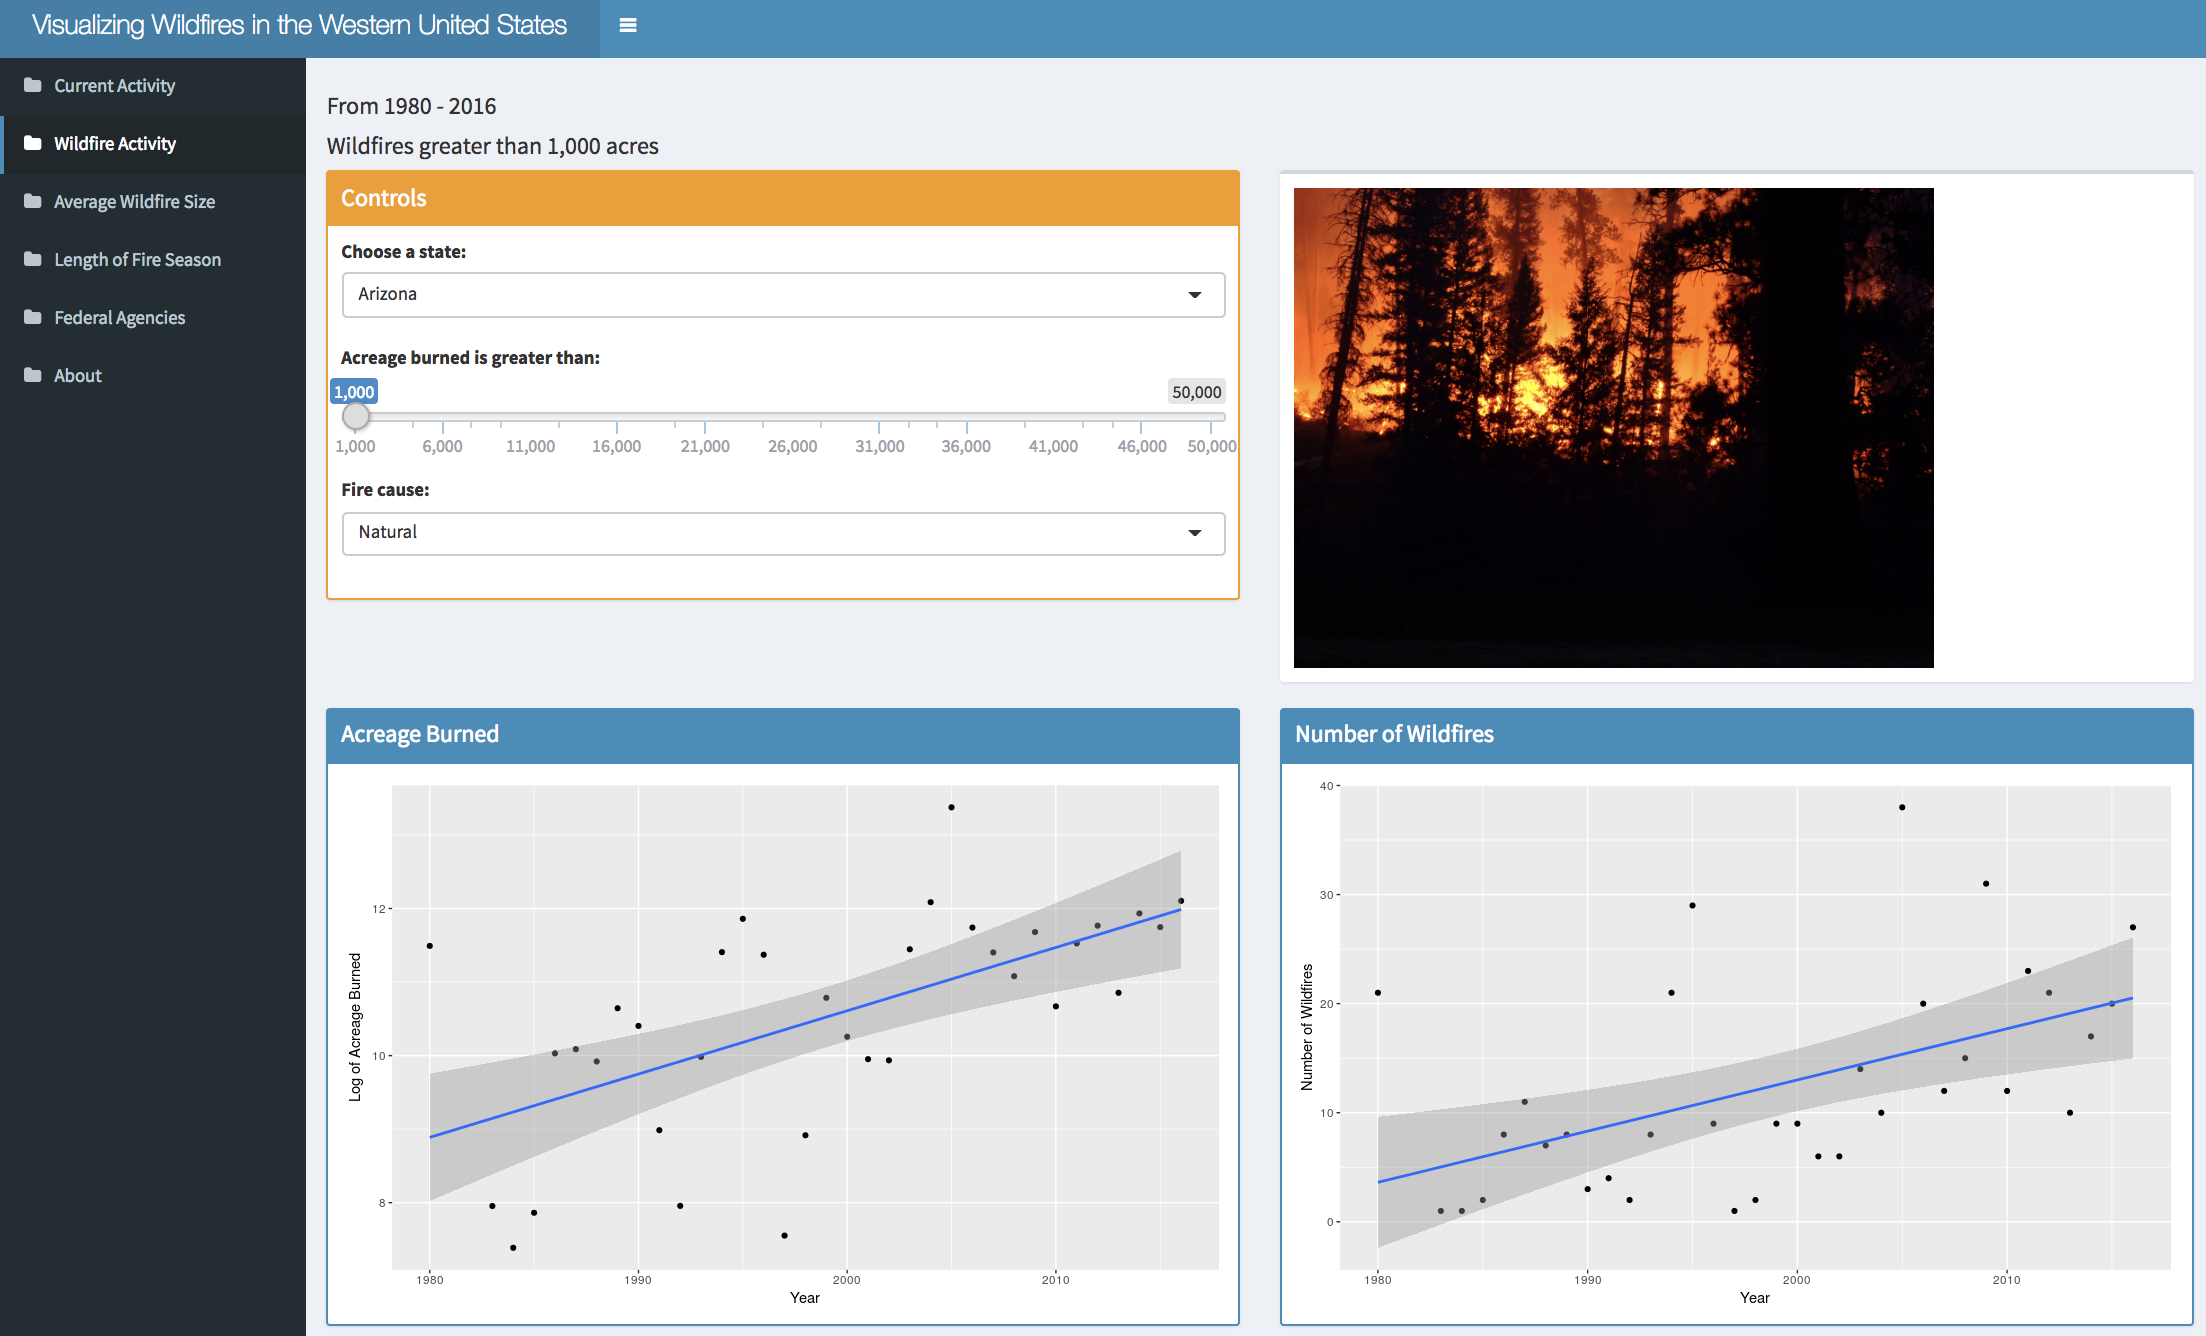 Interactive Wildfire Application for Western United States